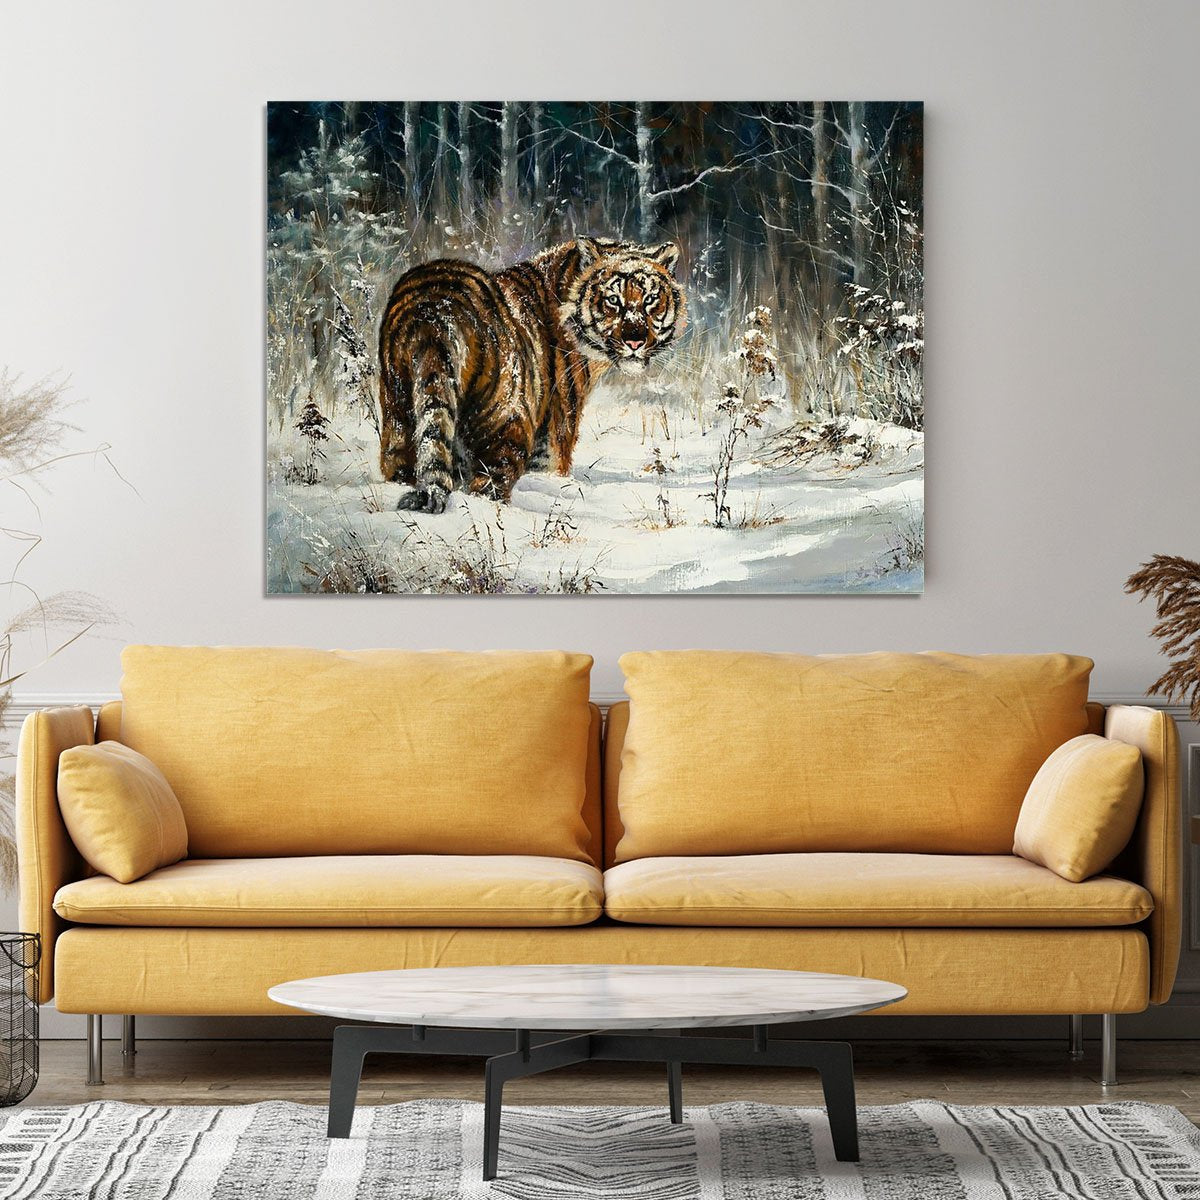 Landscape with a tiger in winter wood Canvas Print or Poster